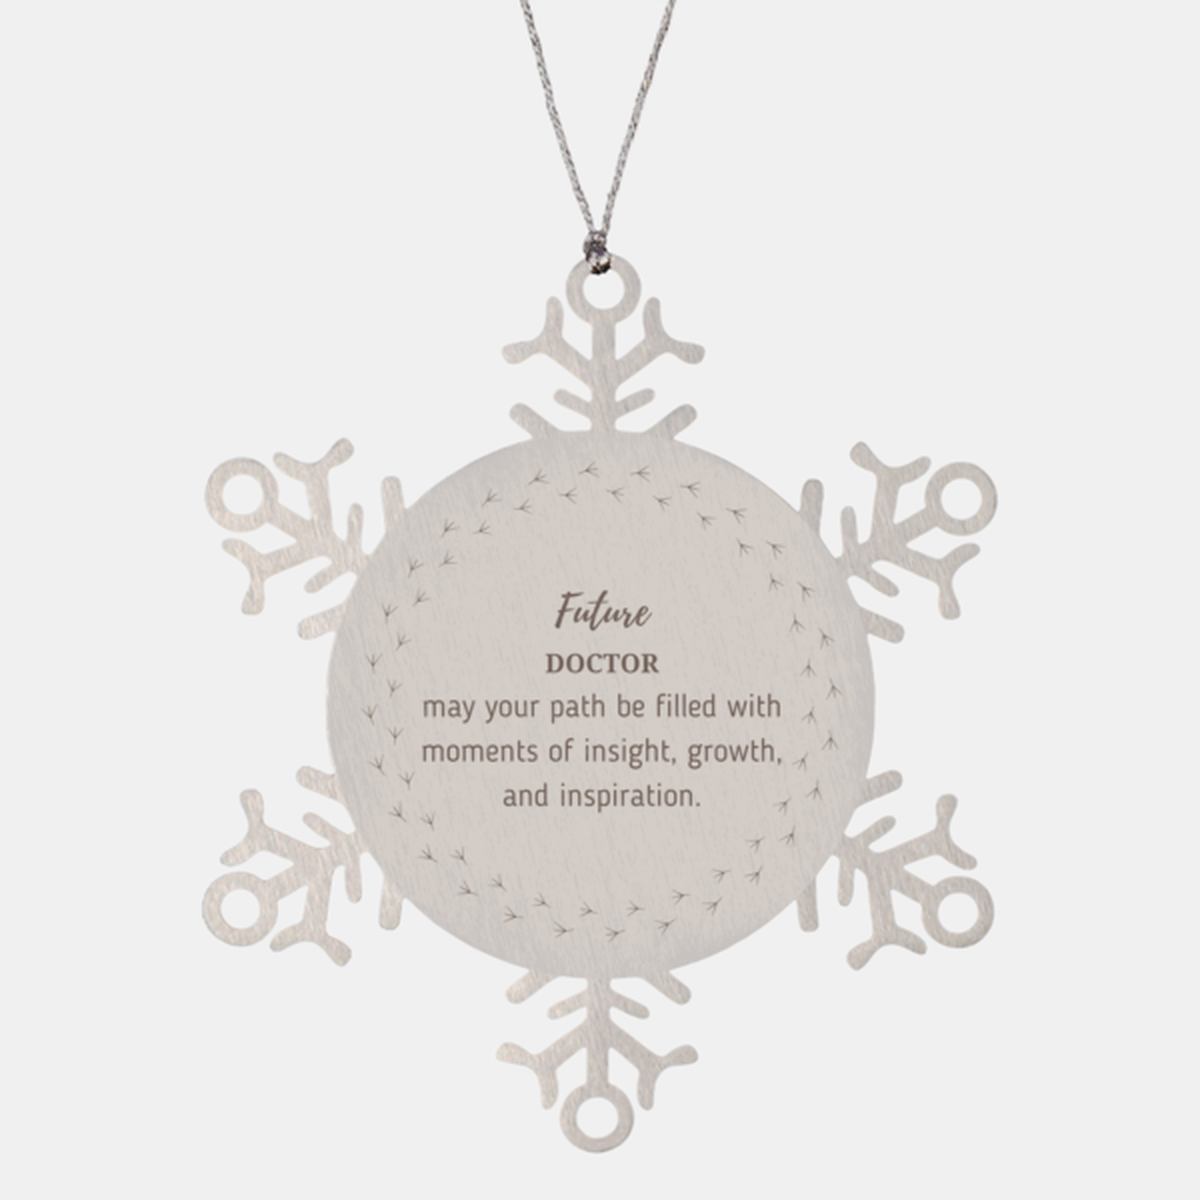 Future Doctor Gifts, May your path be filled with moments of insight, Graduation Gifts for New Doctor, Christmas Unique Snowflake Ornament For Men, Women, Friends